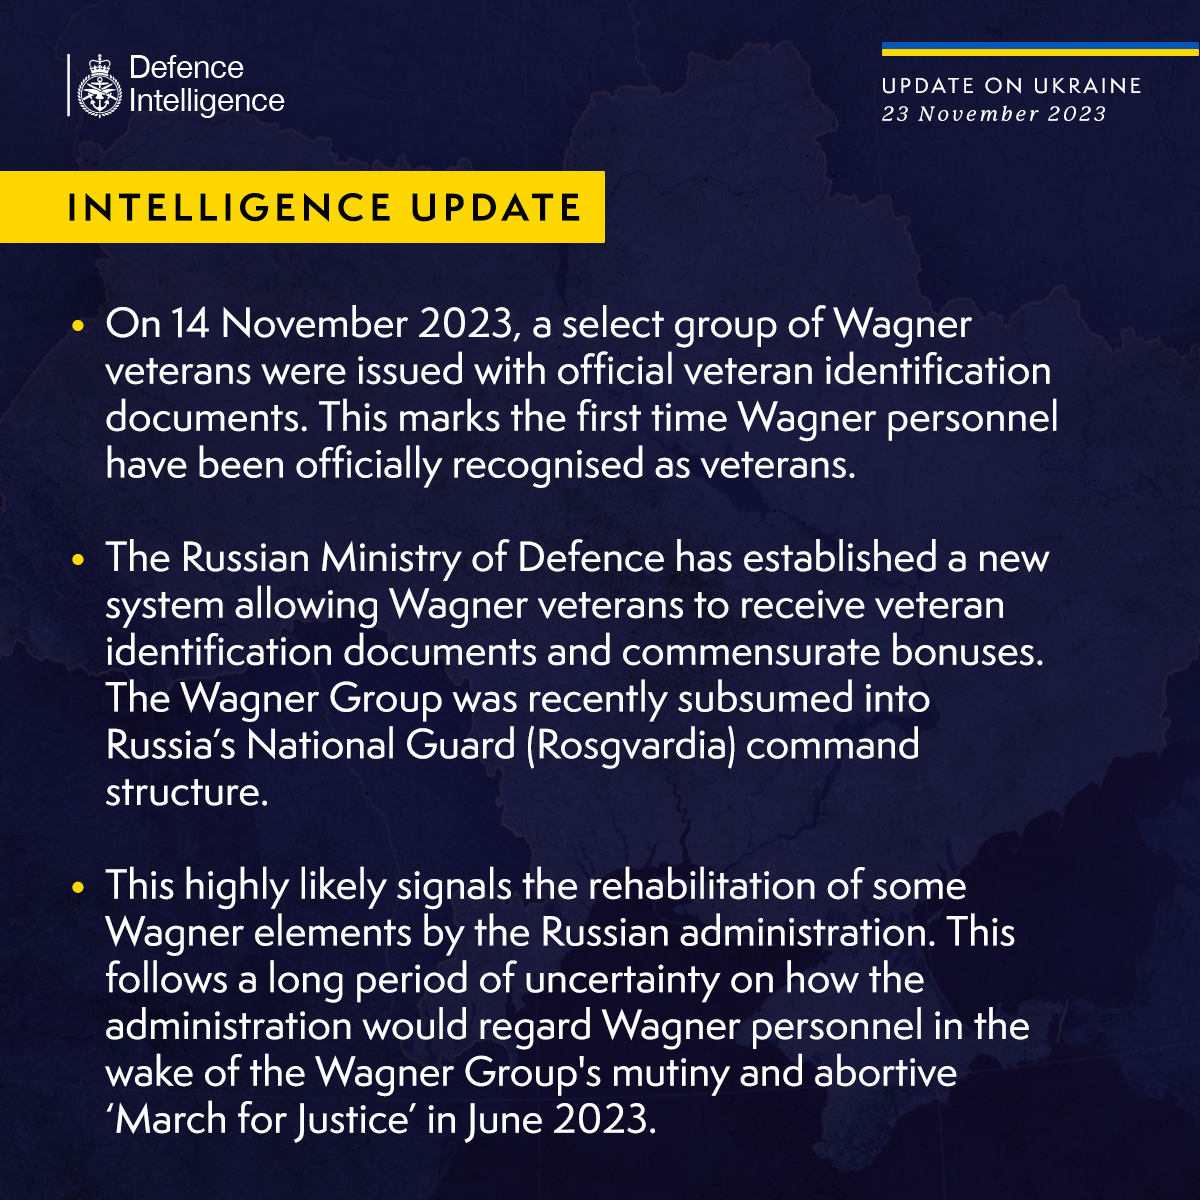 Latest Defence Intelligence update on the situation in Ukraine – 23 November 2023. Find out more about Defence Intelligence's use of language: ow.ly/Jb5I50QaBVm 🇺🇦 #StandWithUkraine 🇺🇦